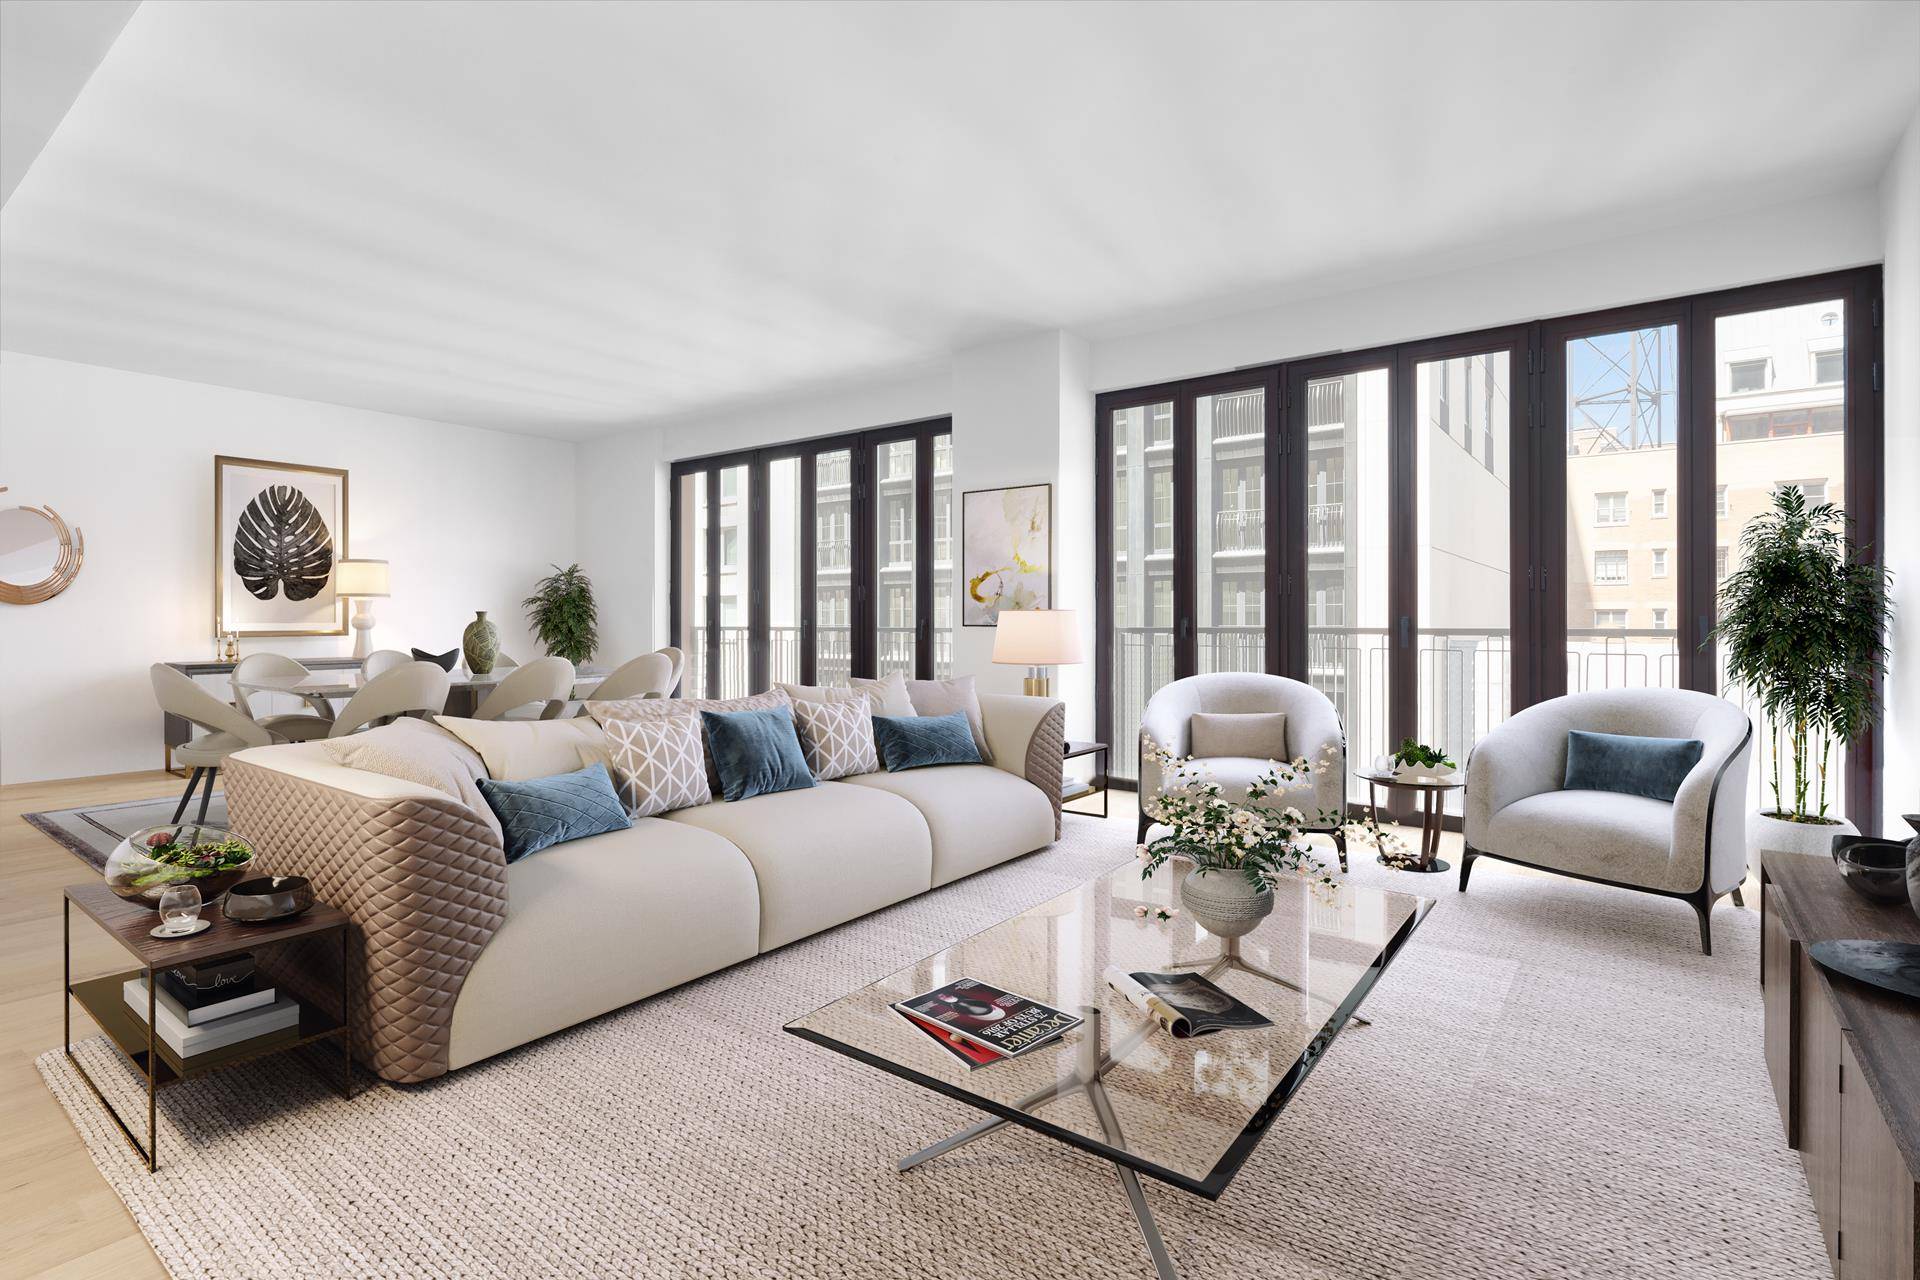 Sleek new construction meets Upper West Side charm at Two Ten West 77, a boutique full service condominium on tree lined 77th Street, minutes from Central Park !